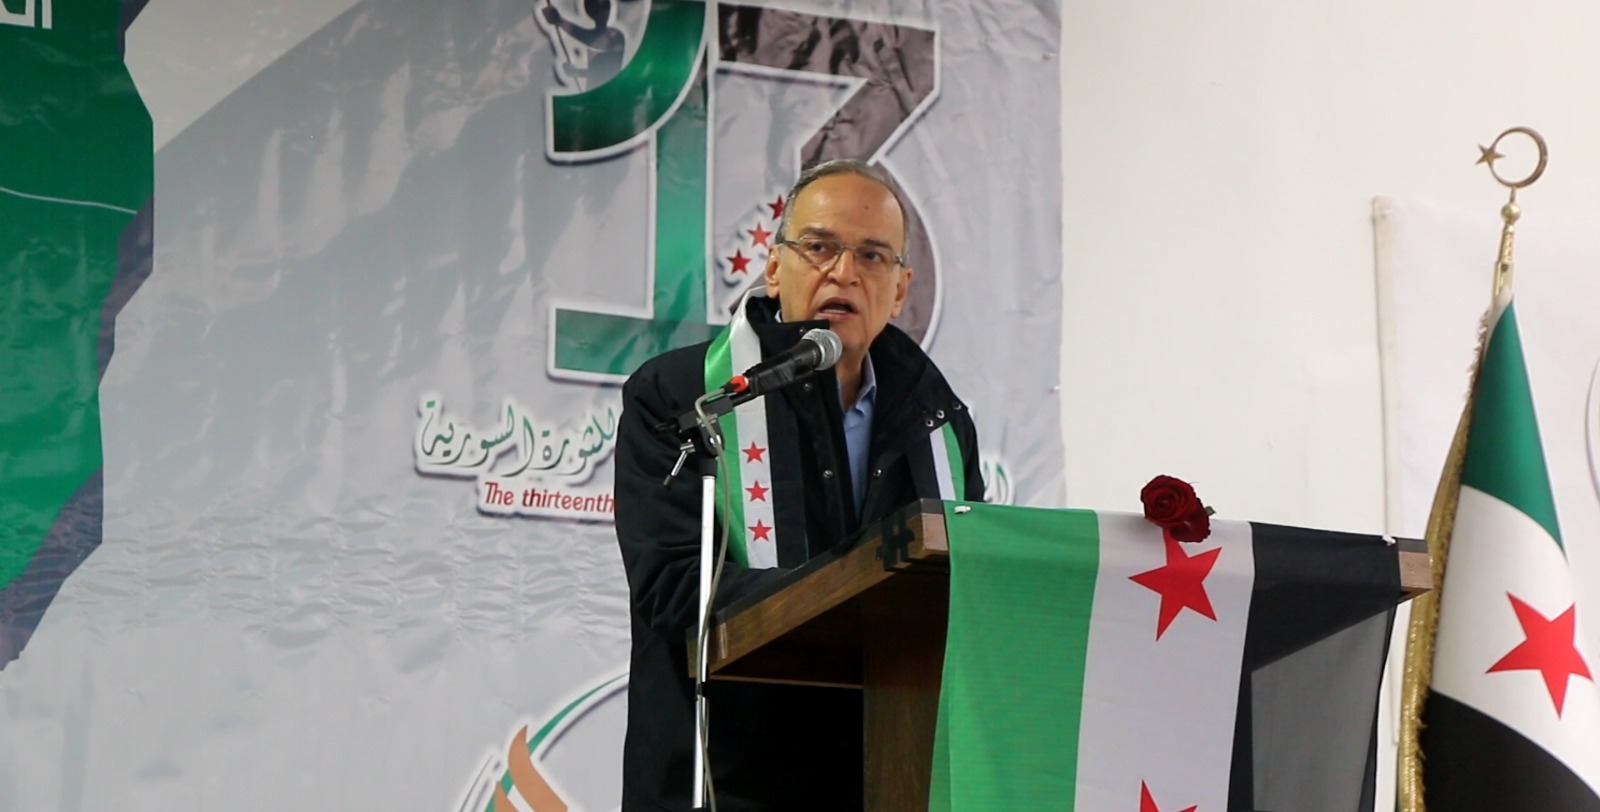 Al-Bahra Reaffirms SOC's Commitment to Uphold Revolution Until Achieving Victory